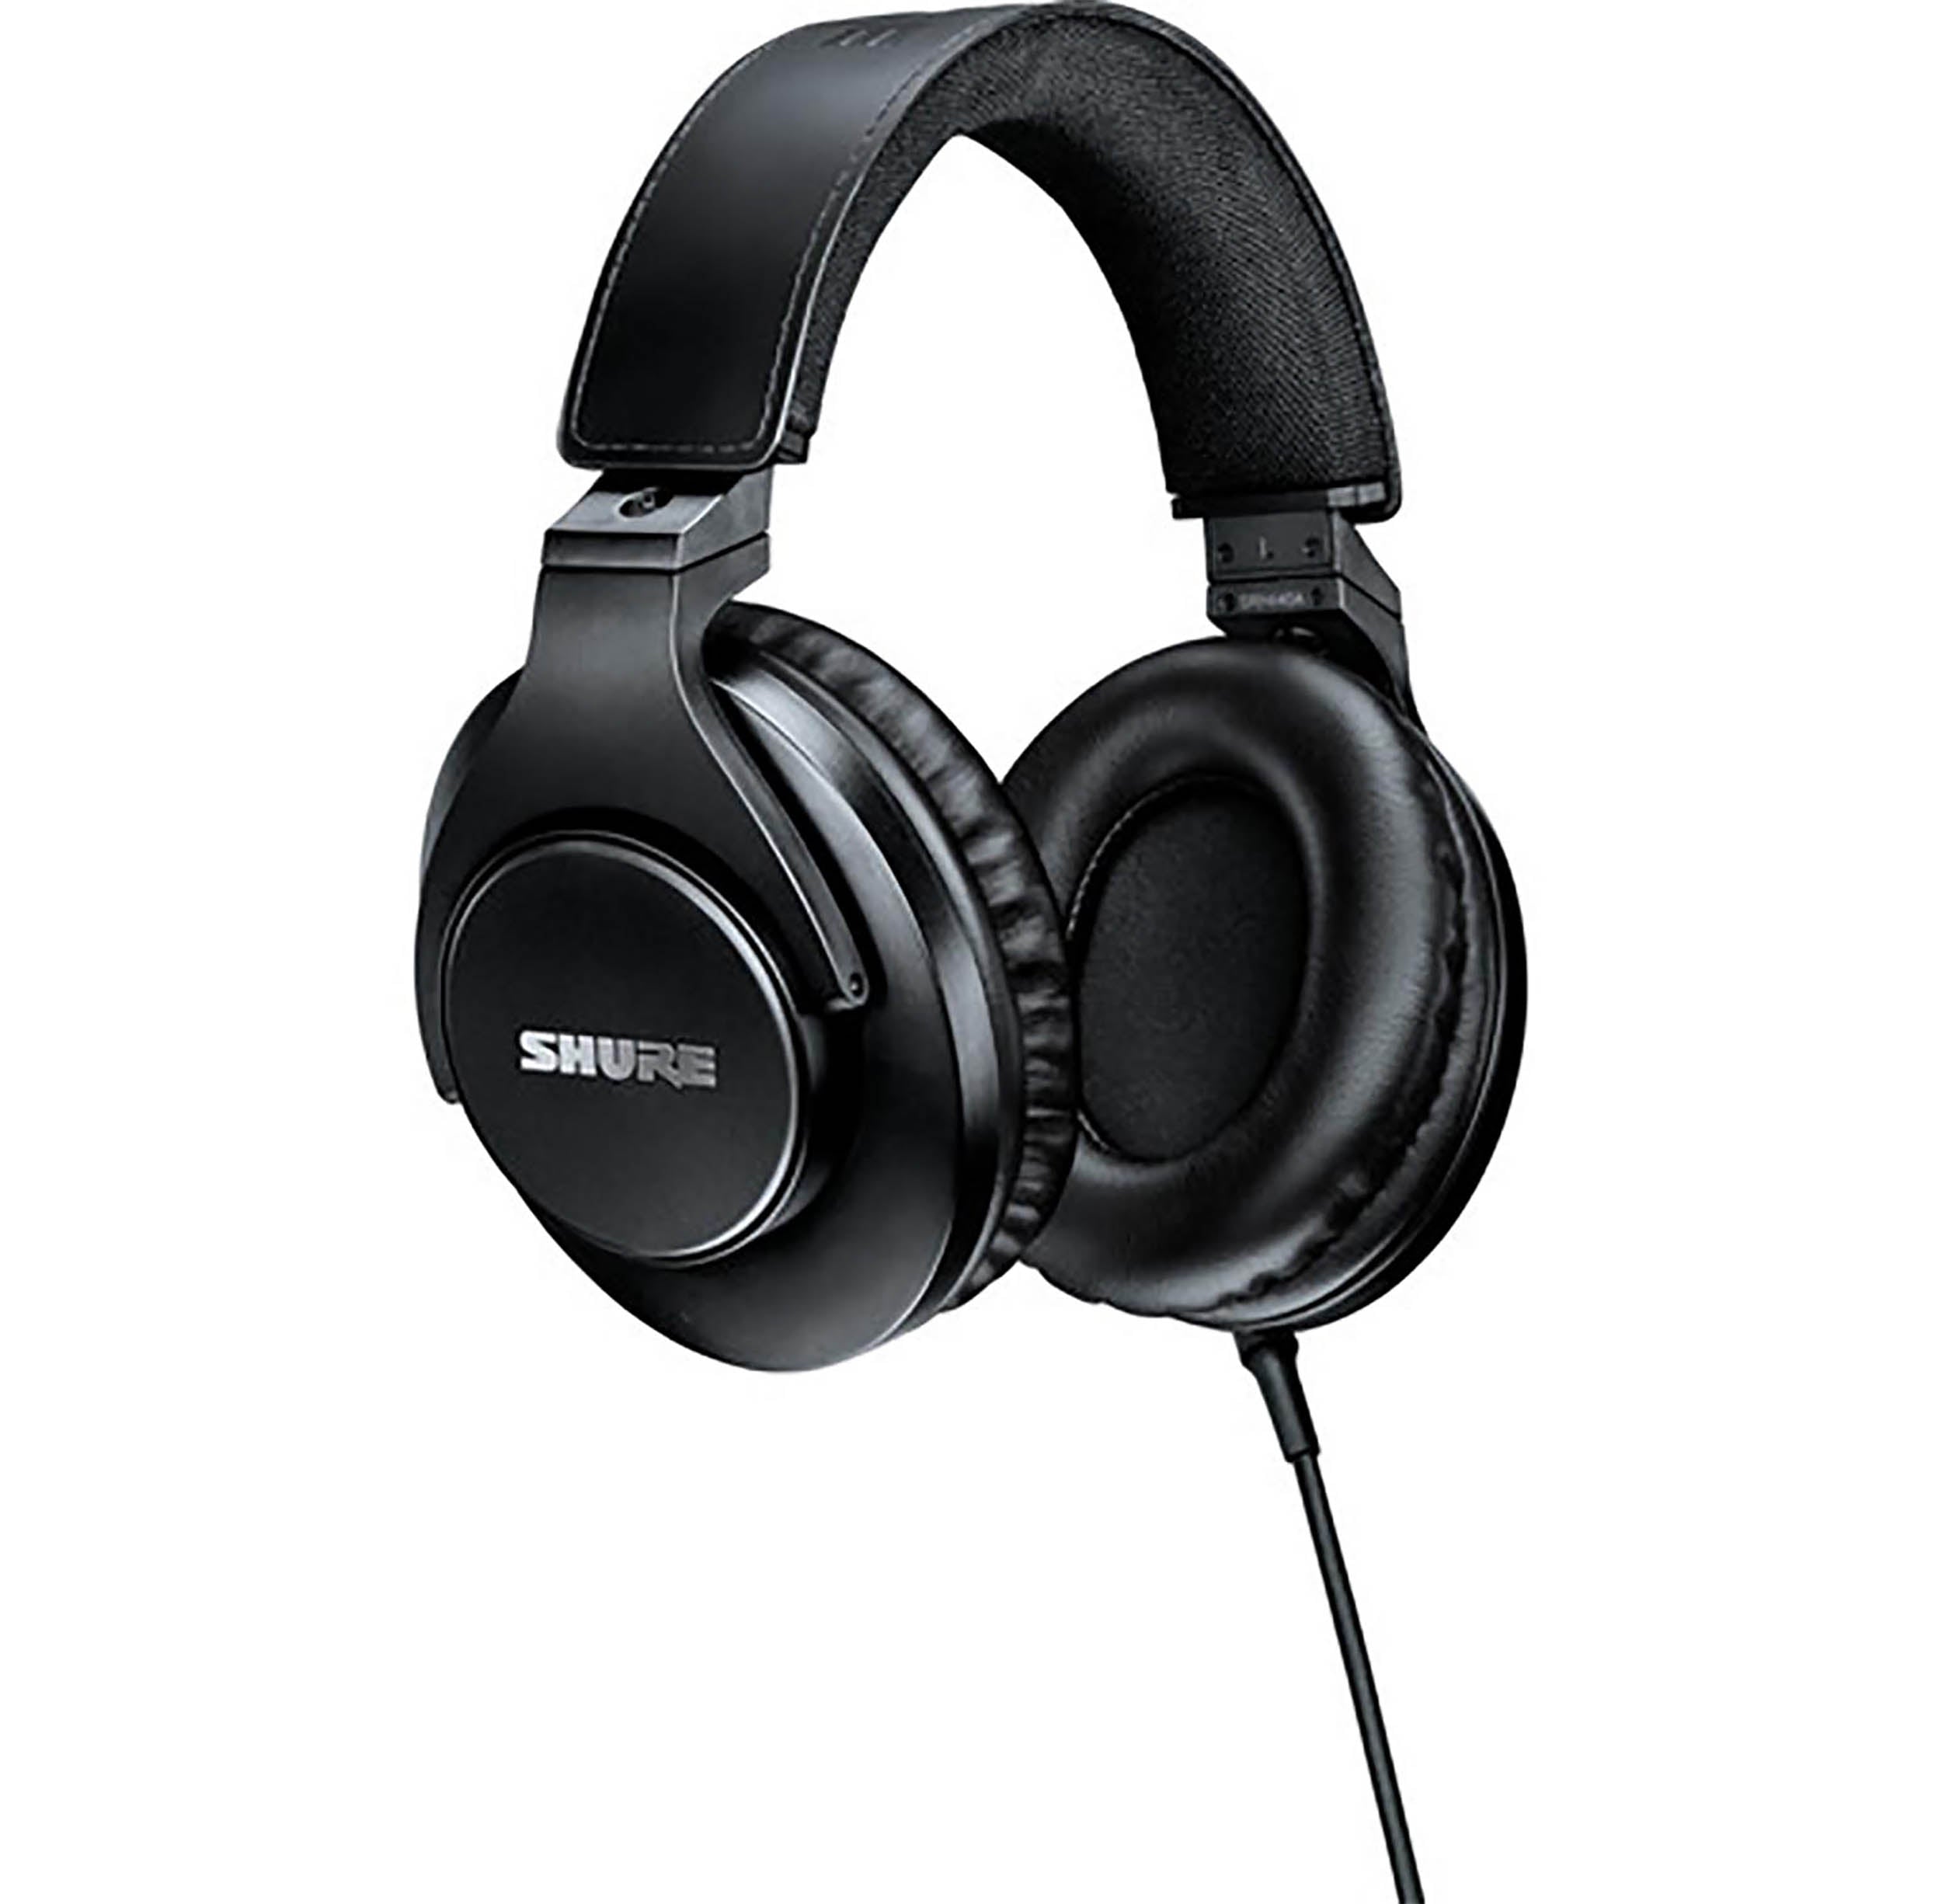 Shure SRH440A Professional Closed-Back Over-Ear Studio Headphones by Shure